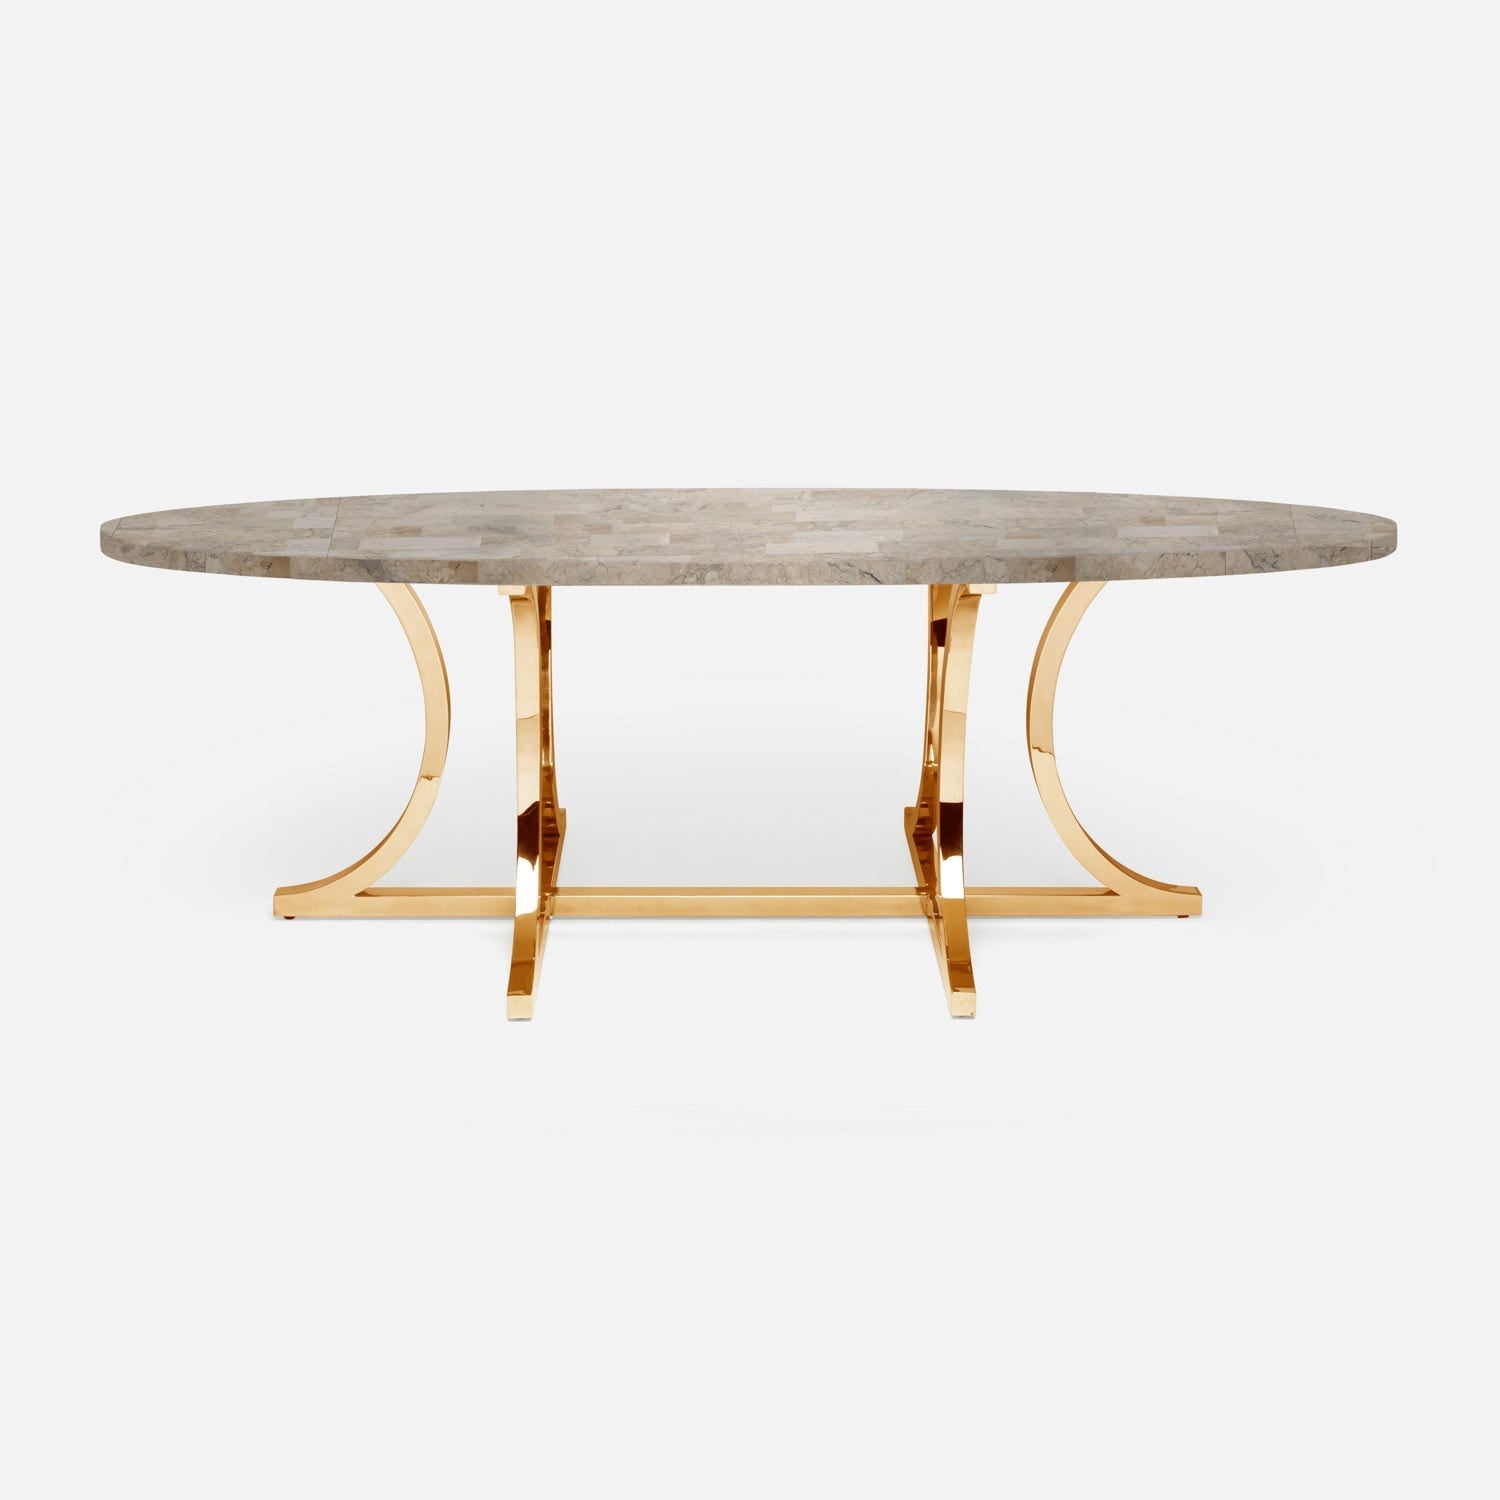 Made Goods Leighton 72" x 42" x 30" Polished Gold Steel Dinning Table With Oval Warm Gray Marble Table Top